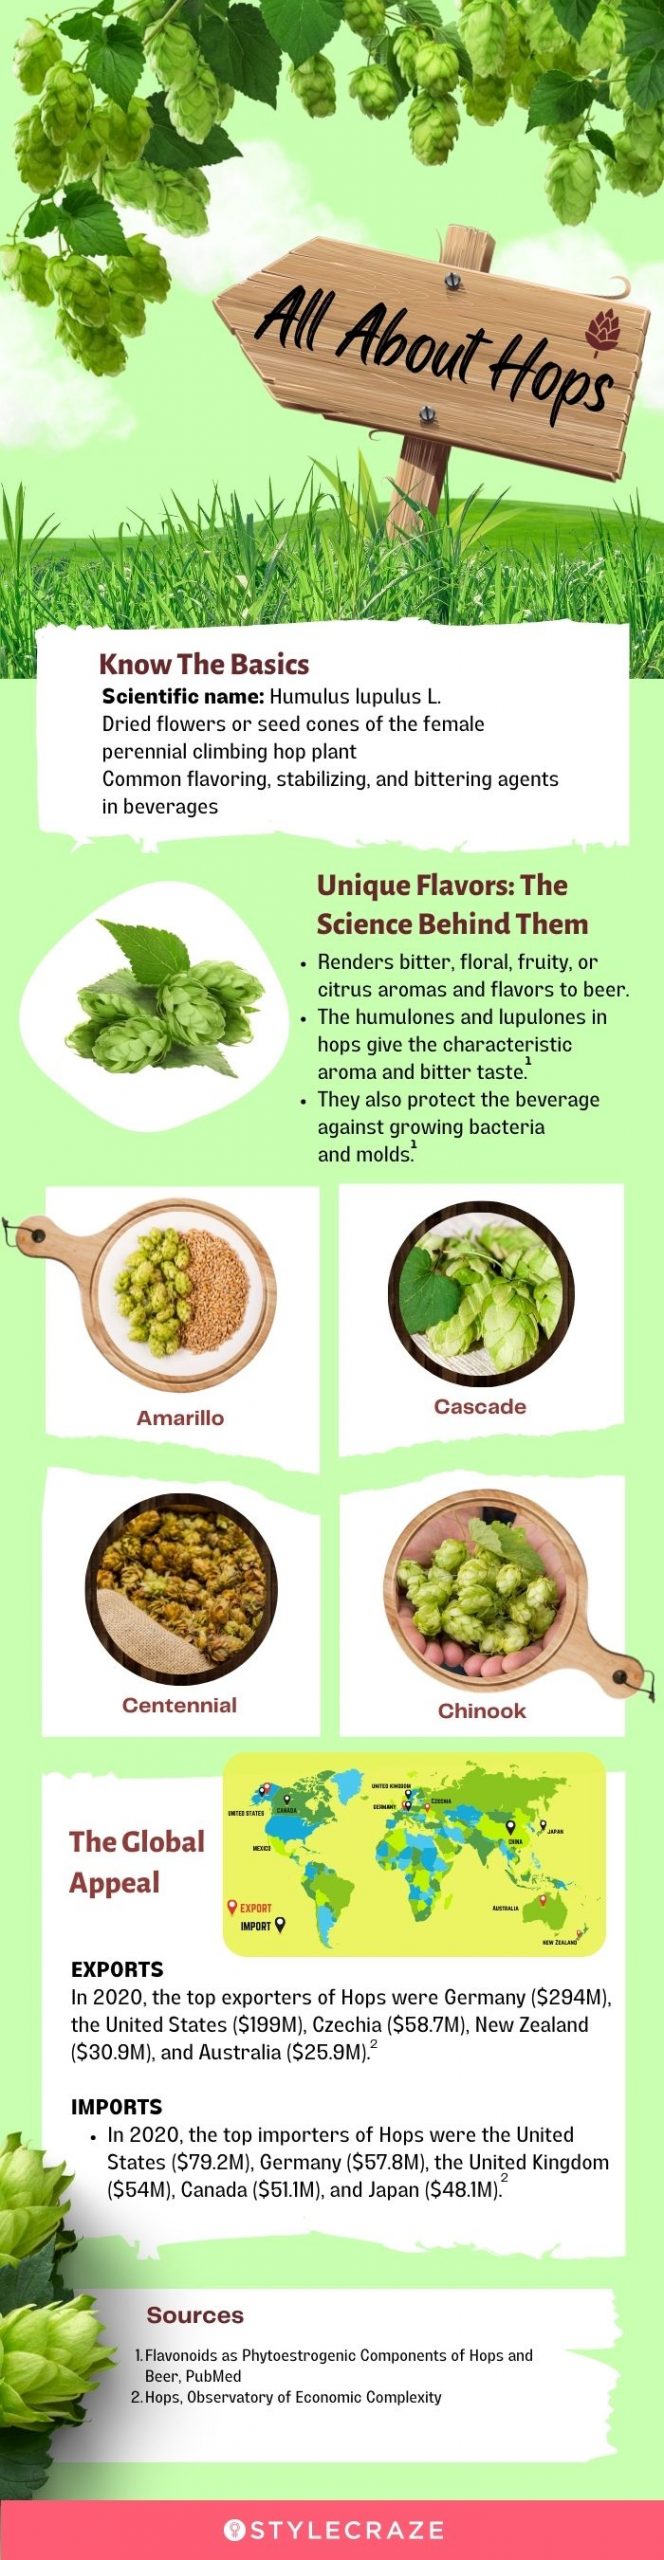 all about hops (infographic)